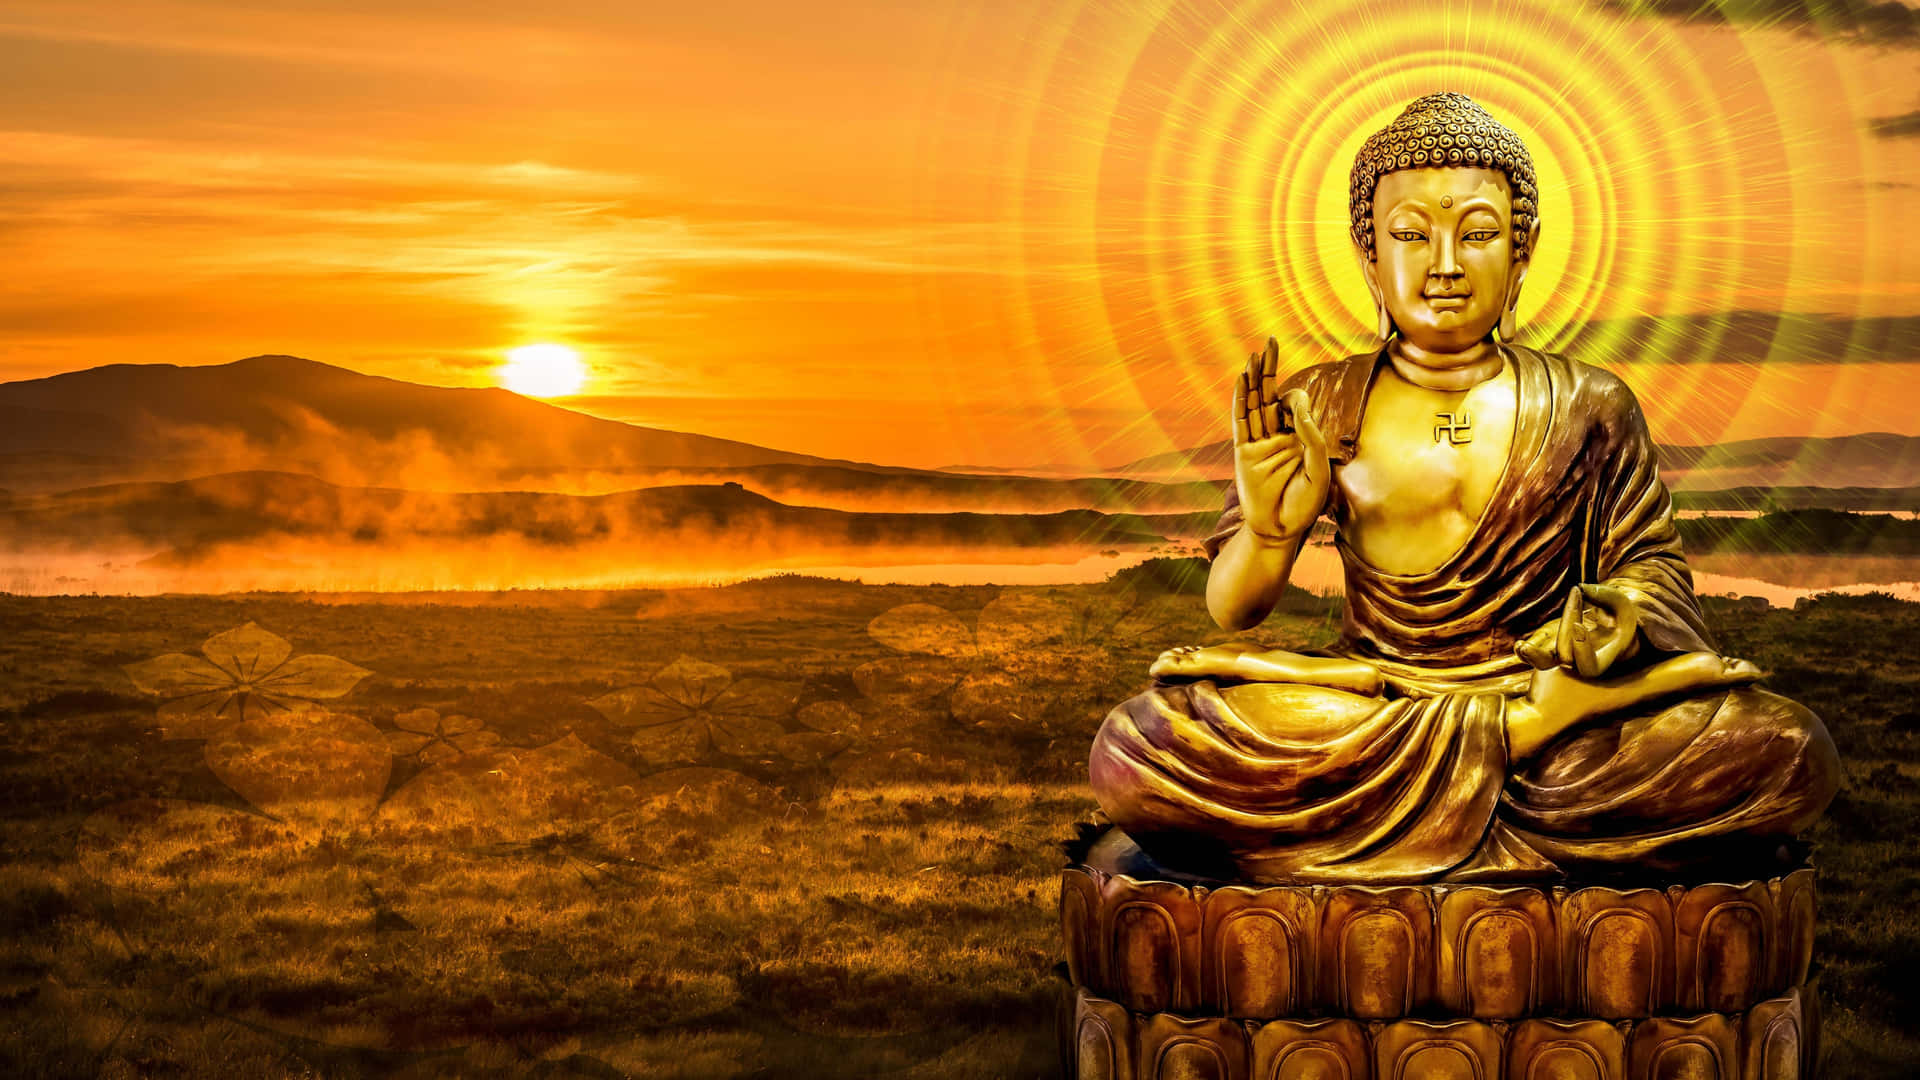 Buddha Statue In The Middle Of A Field With Sunset